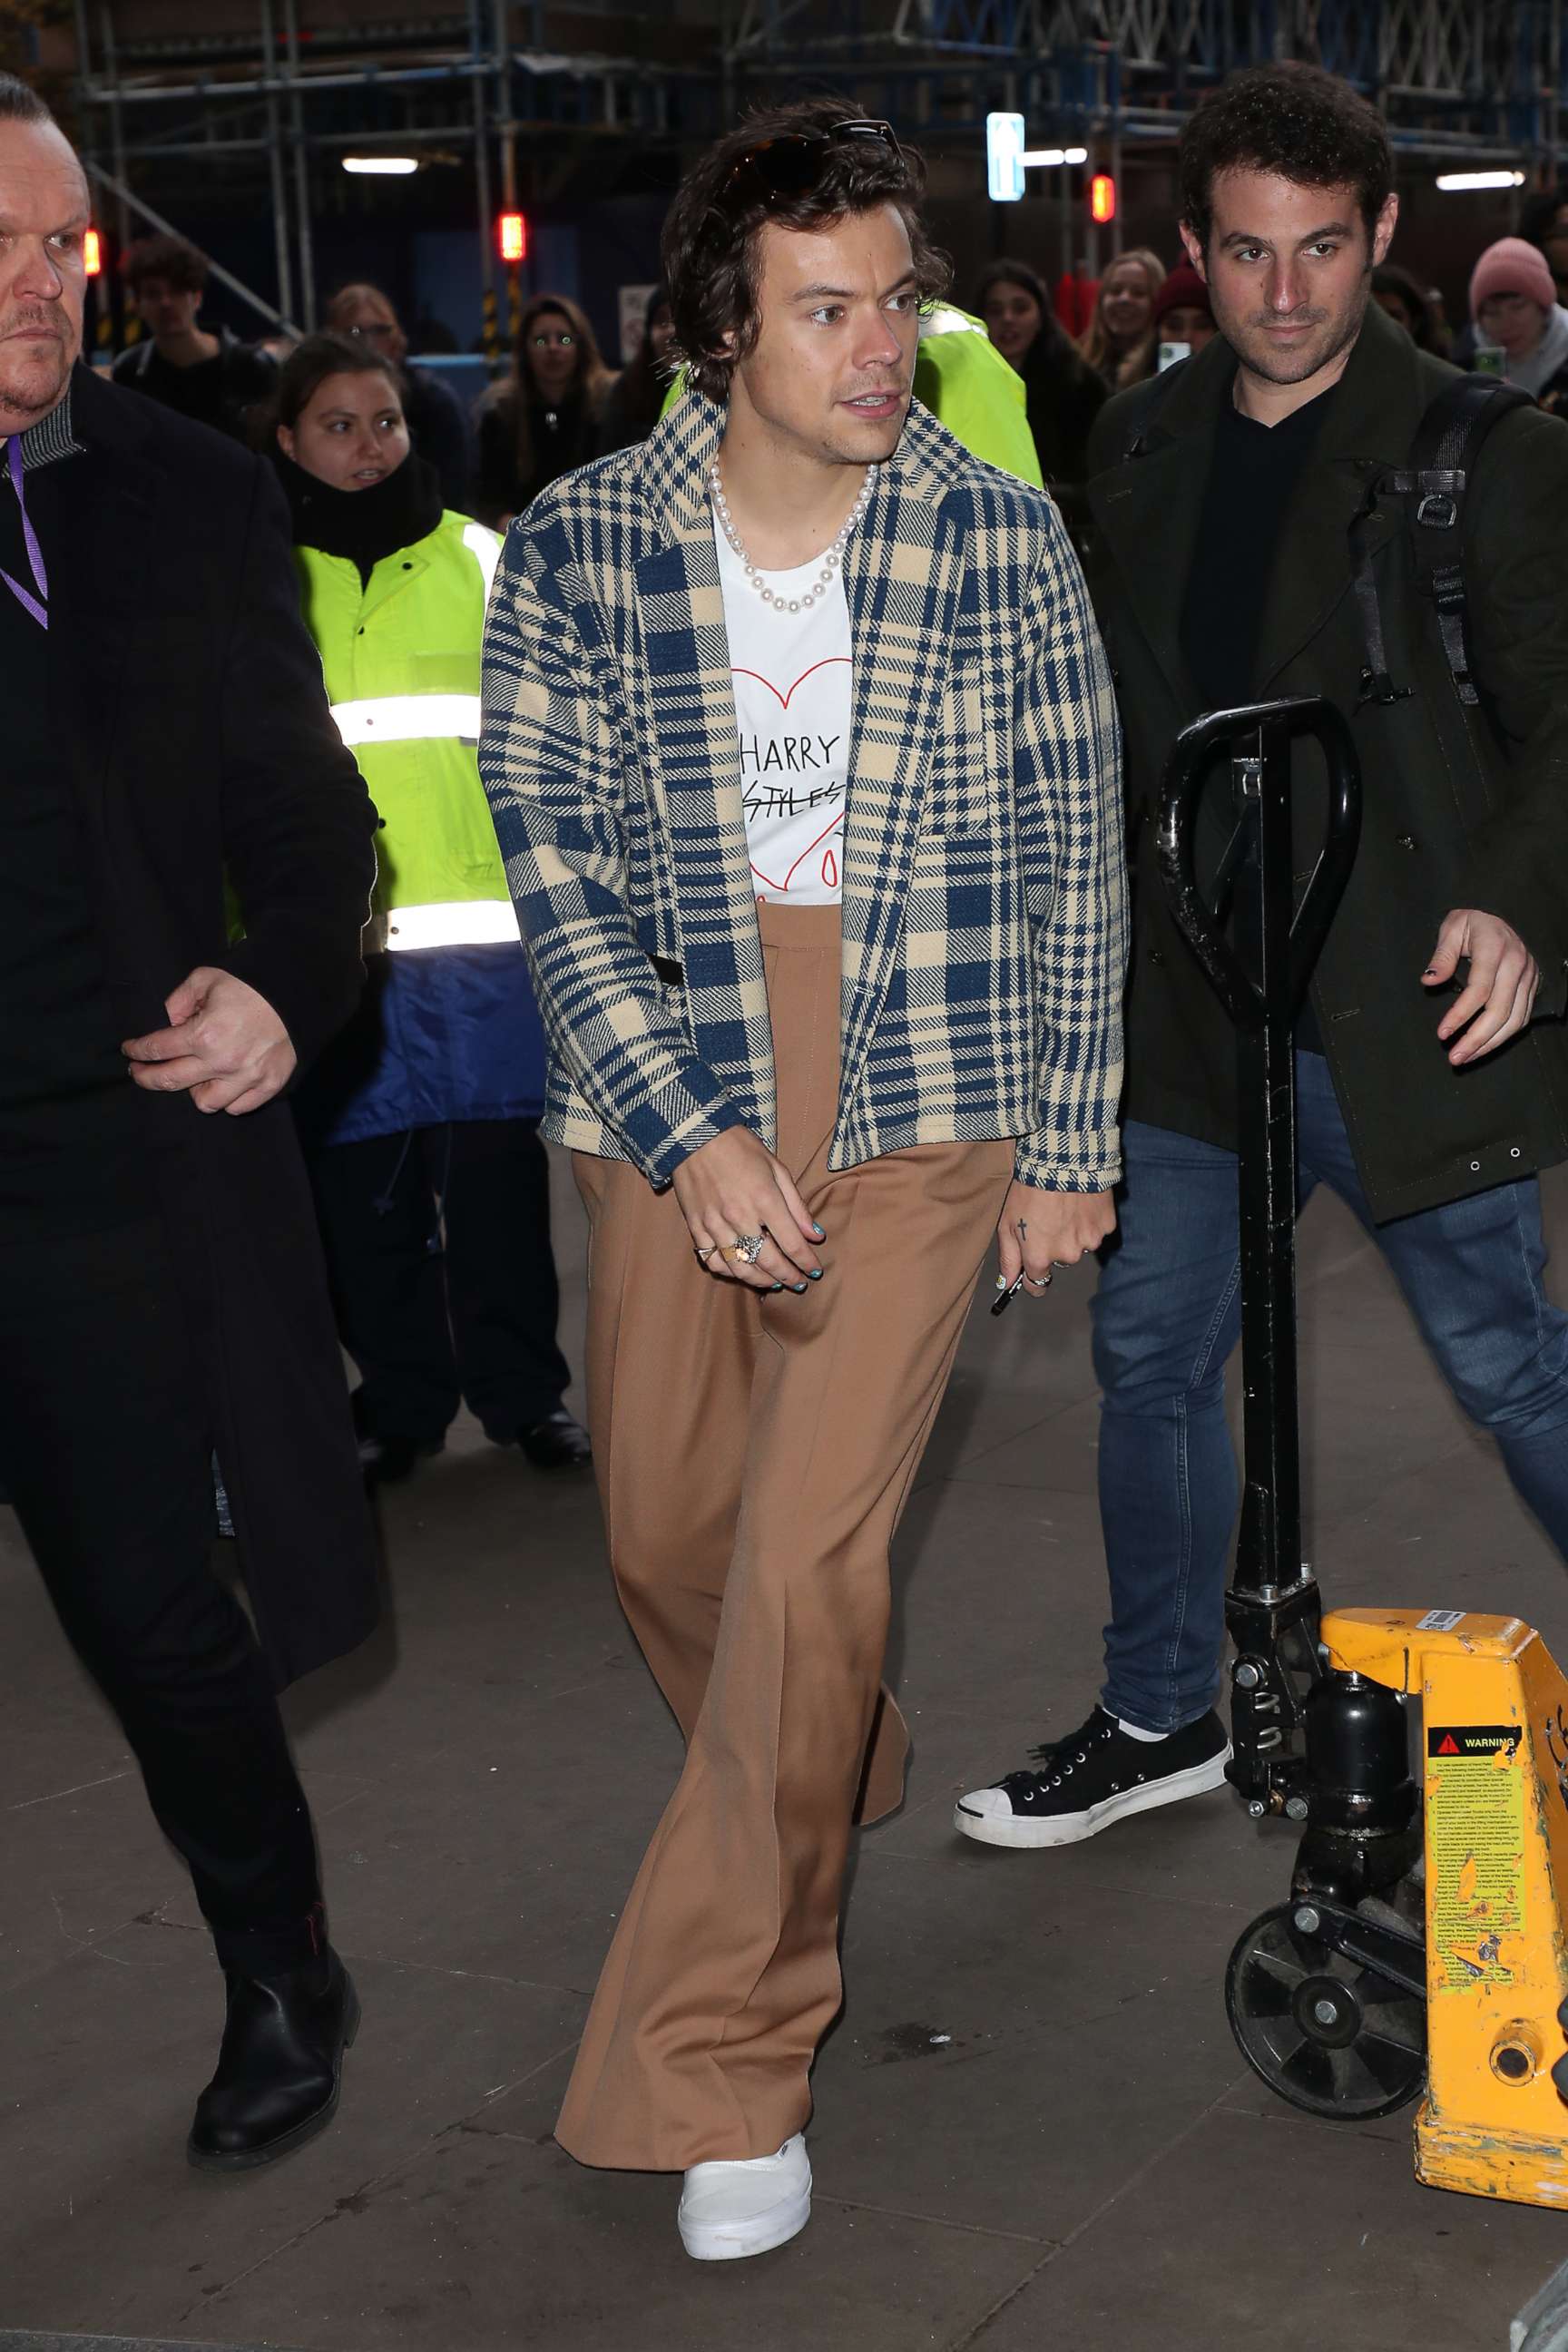 PHOTO: Harry Styles seen leaving BBC Radio One after performing in the Live Lounge on Dec. 18, 2019 in London.